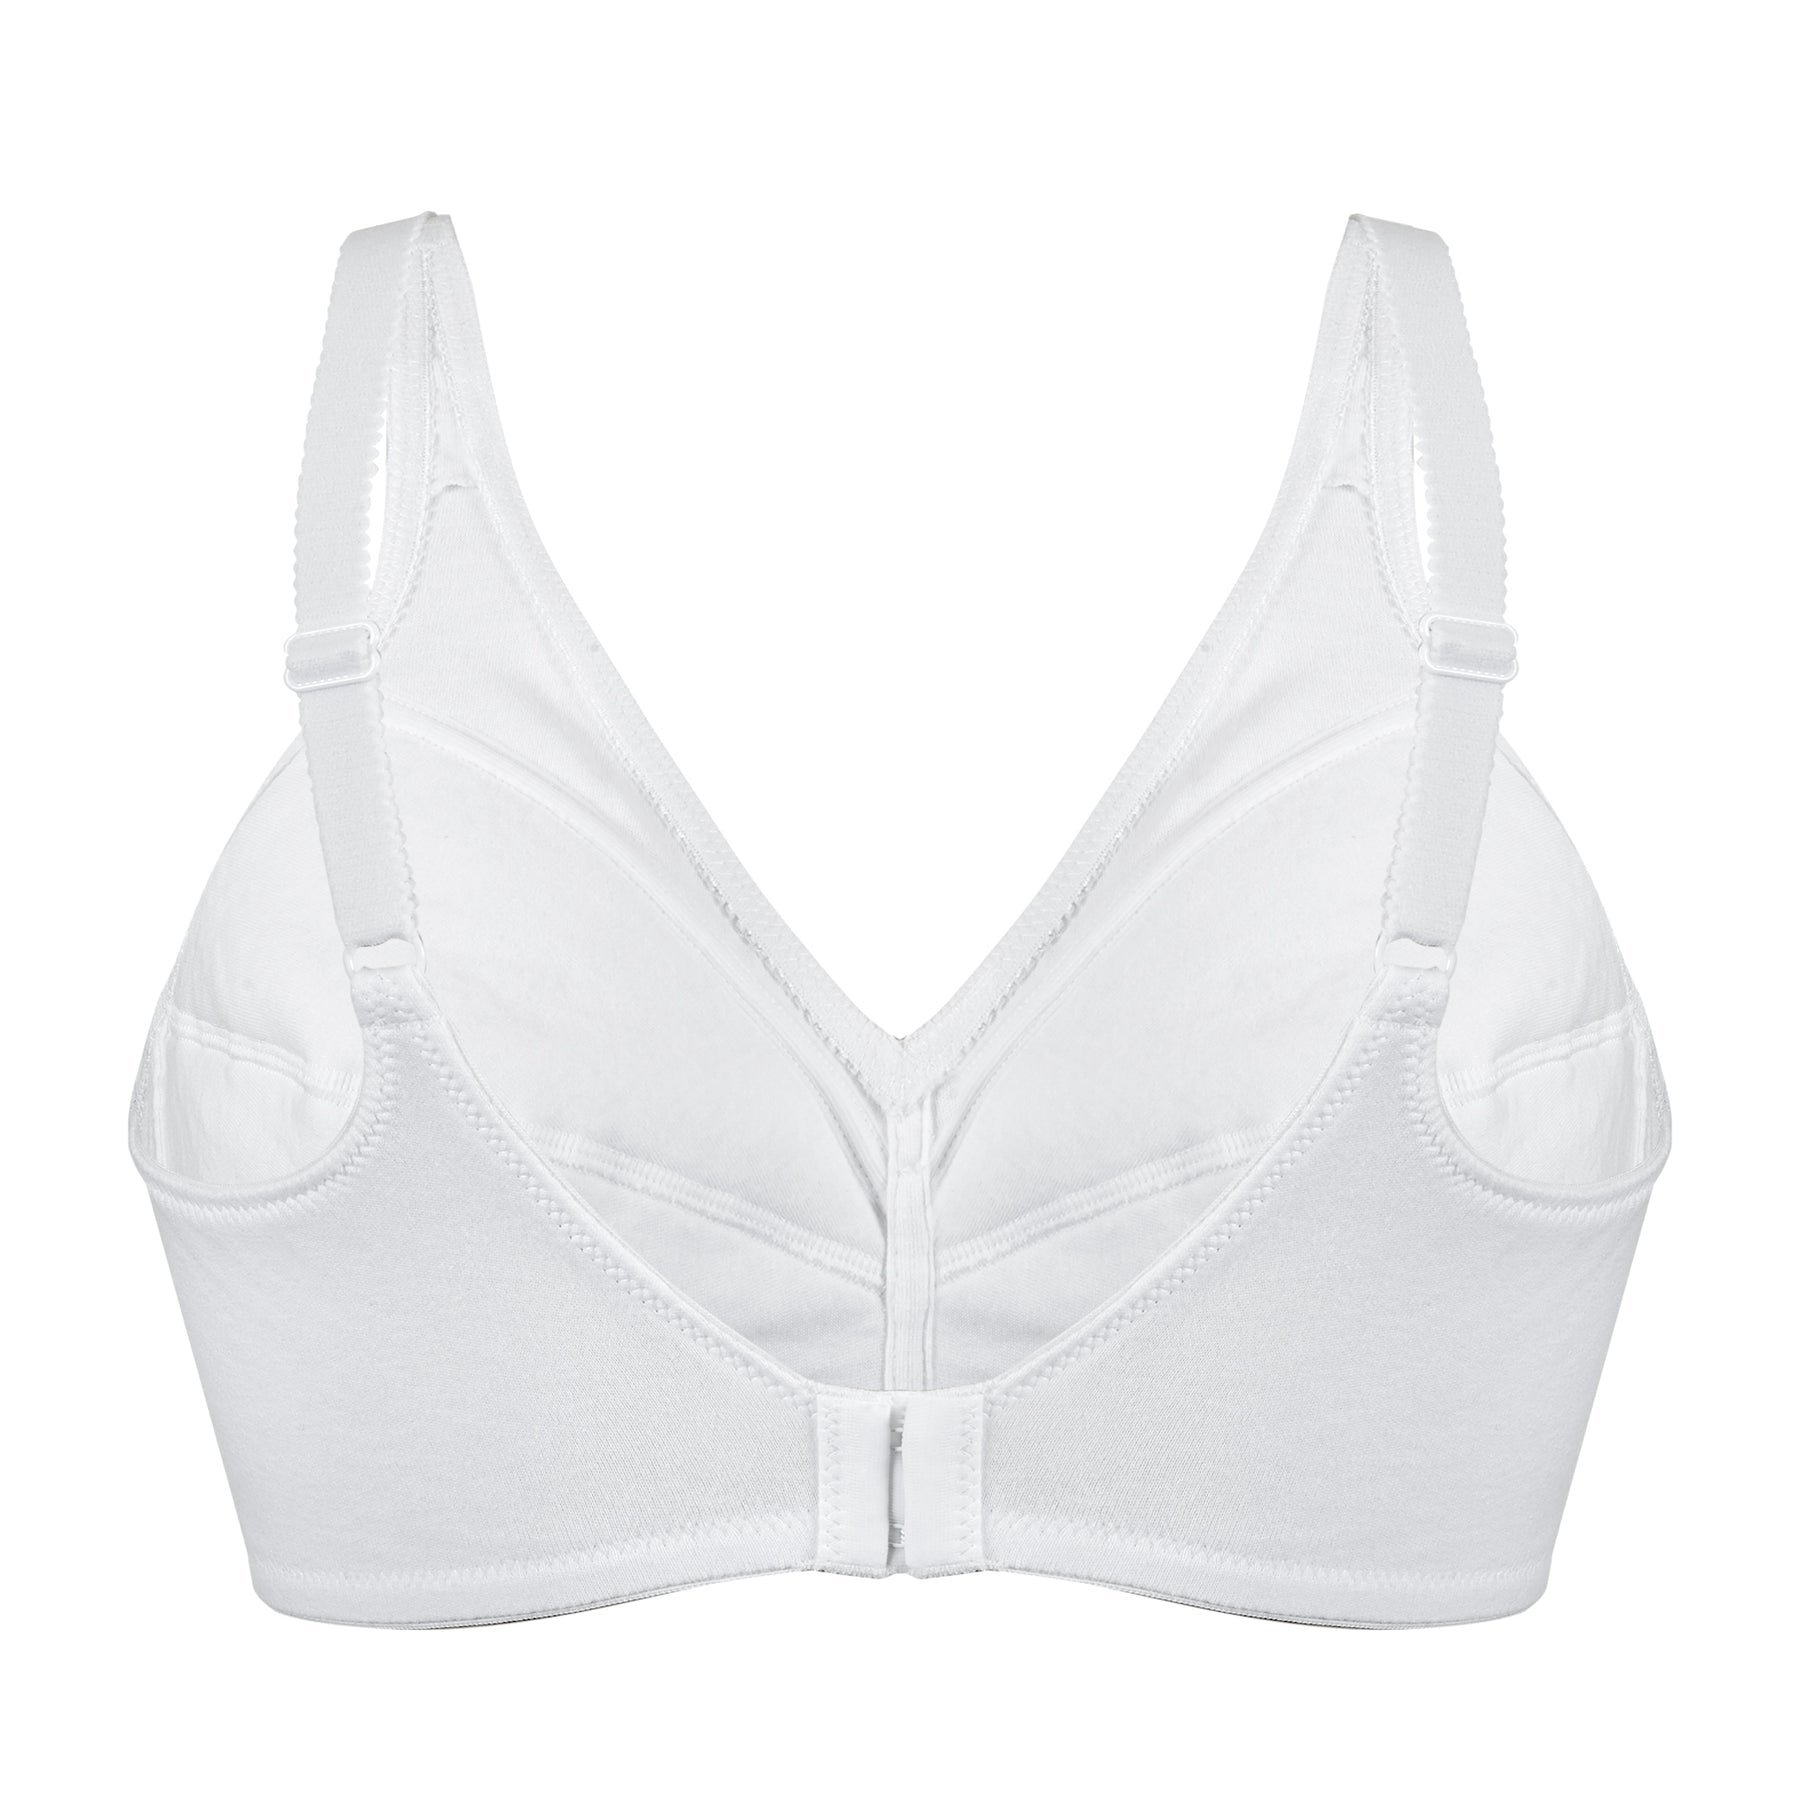 Bestform Floral Trim Wireless Cotton Bra with Lightly Lined Cups 5006233